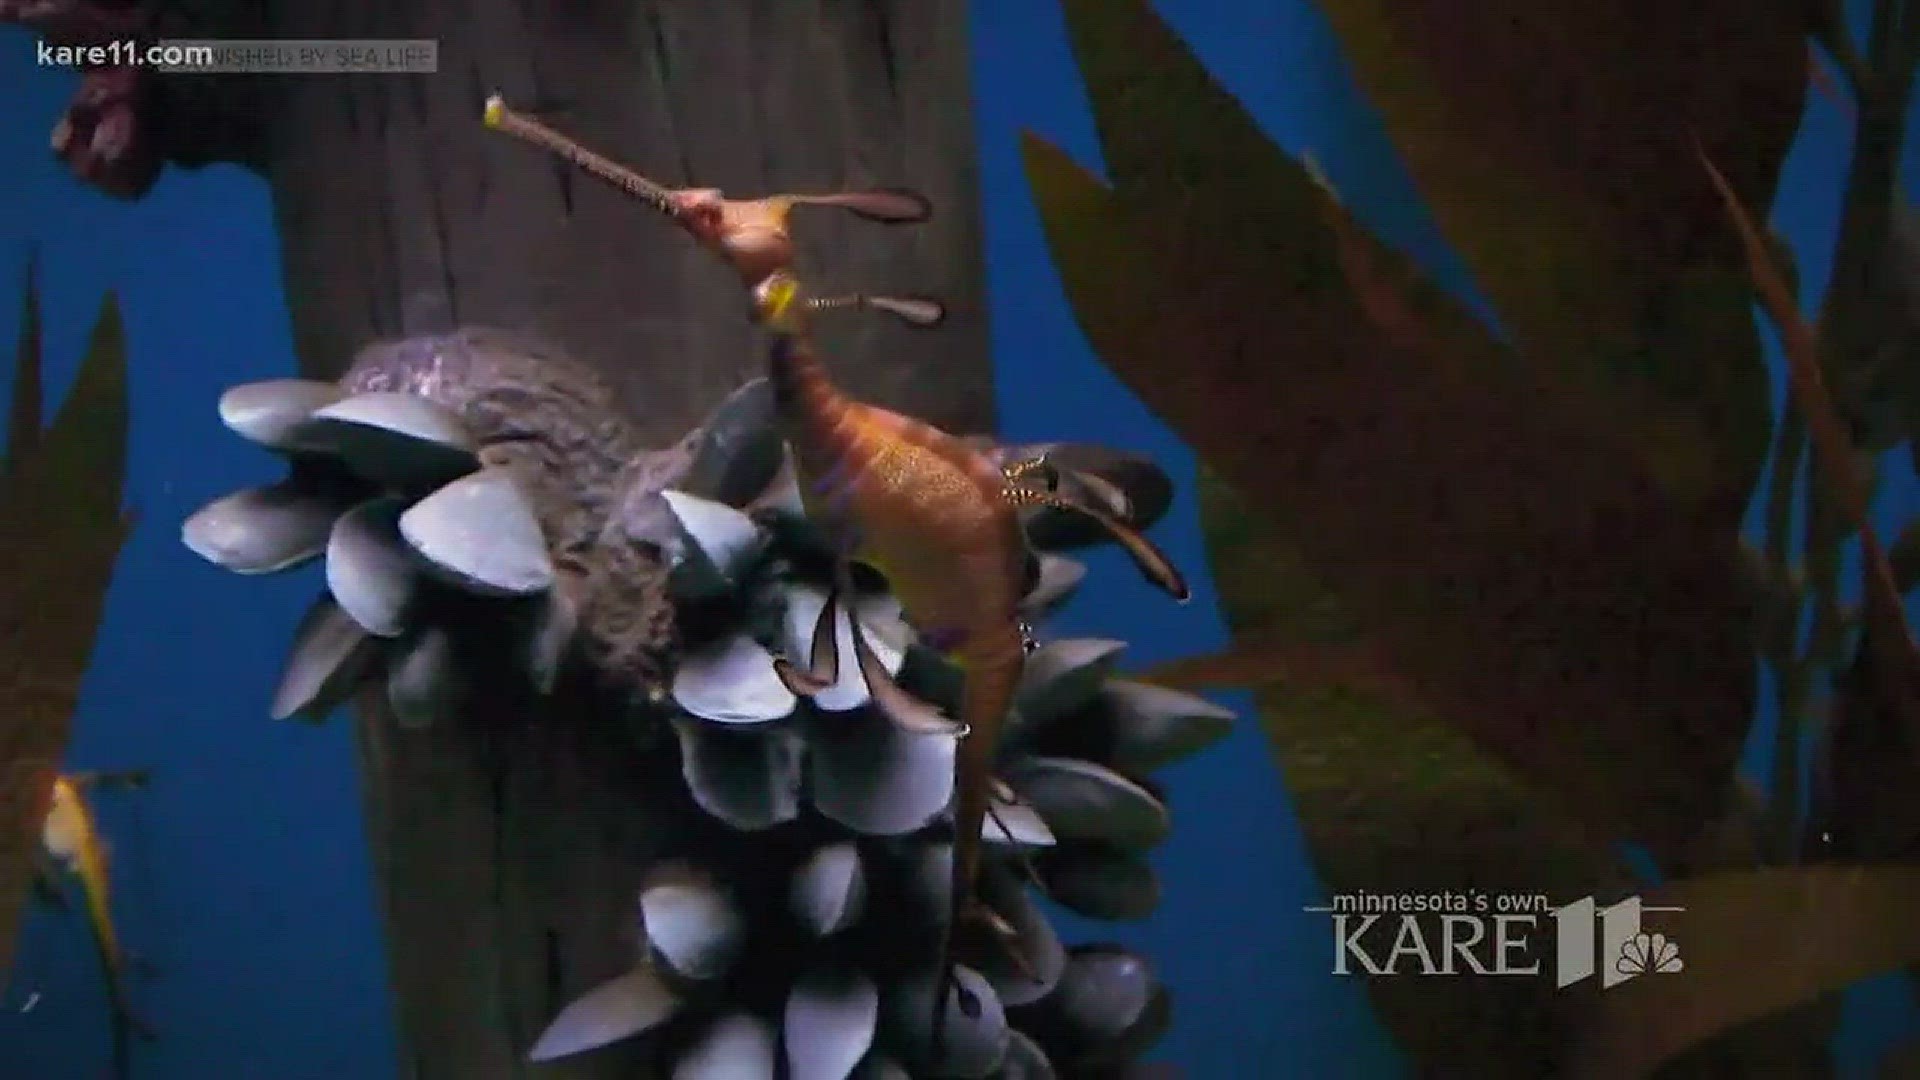 Lovers of underwater life have something to look forward to this Friday, as an interactive exhibit featuring the weedy sea dragon comes to Sea Life MN at Mall of America.